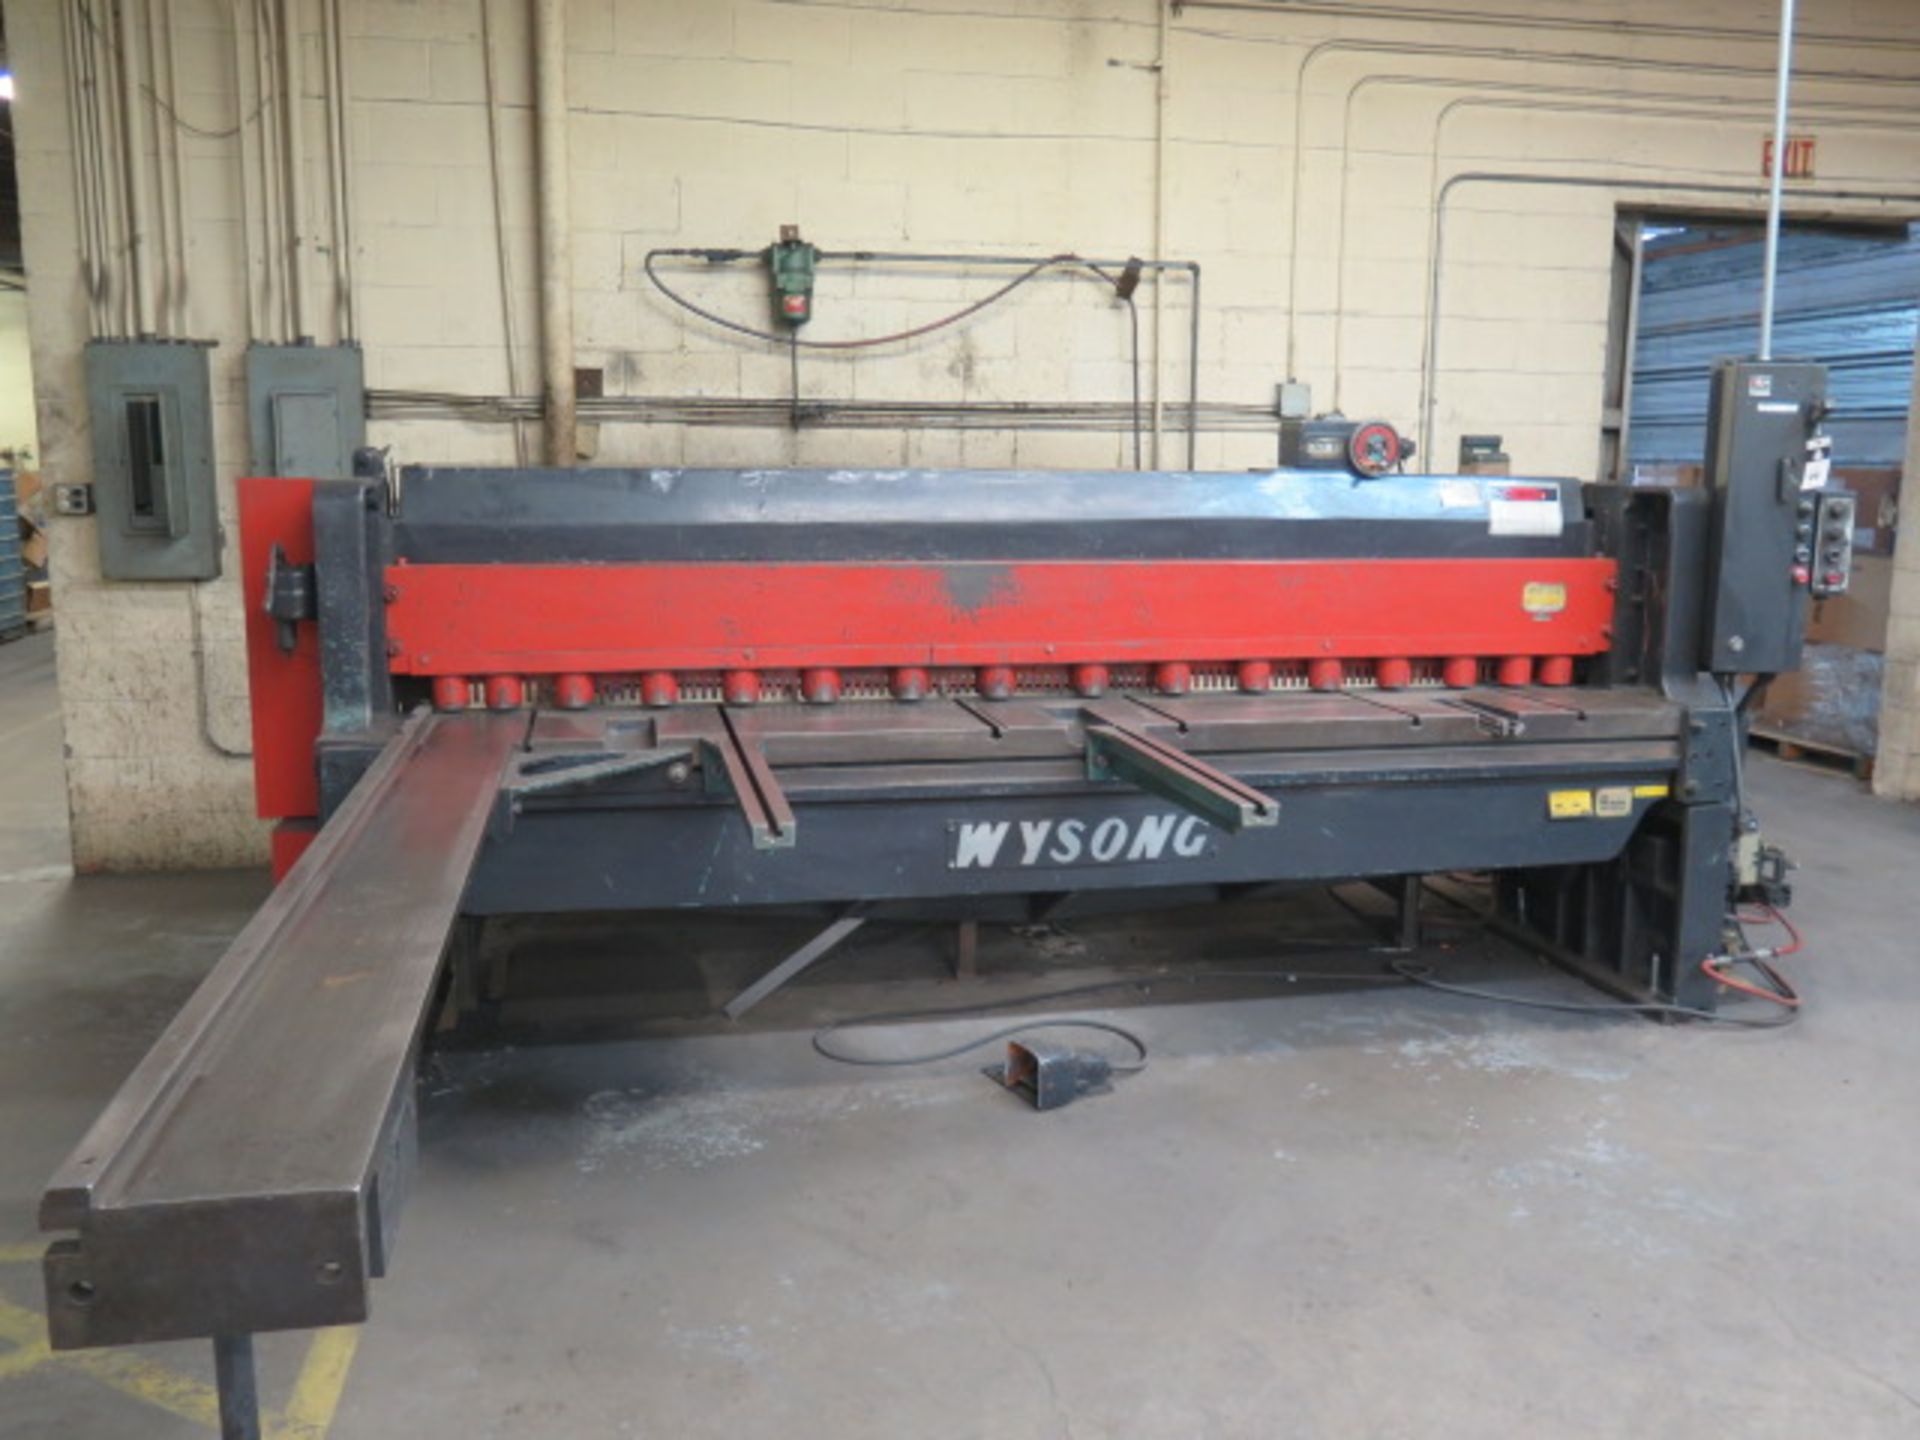 Wysong mdl. 1010 10GA (3/16”) x 10’ Power Shear s/n P32-1540 w/ Dial Power Backgauge, SOLD AS IS